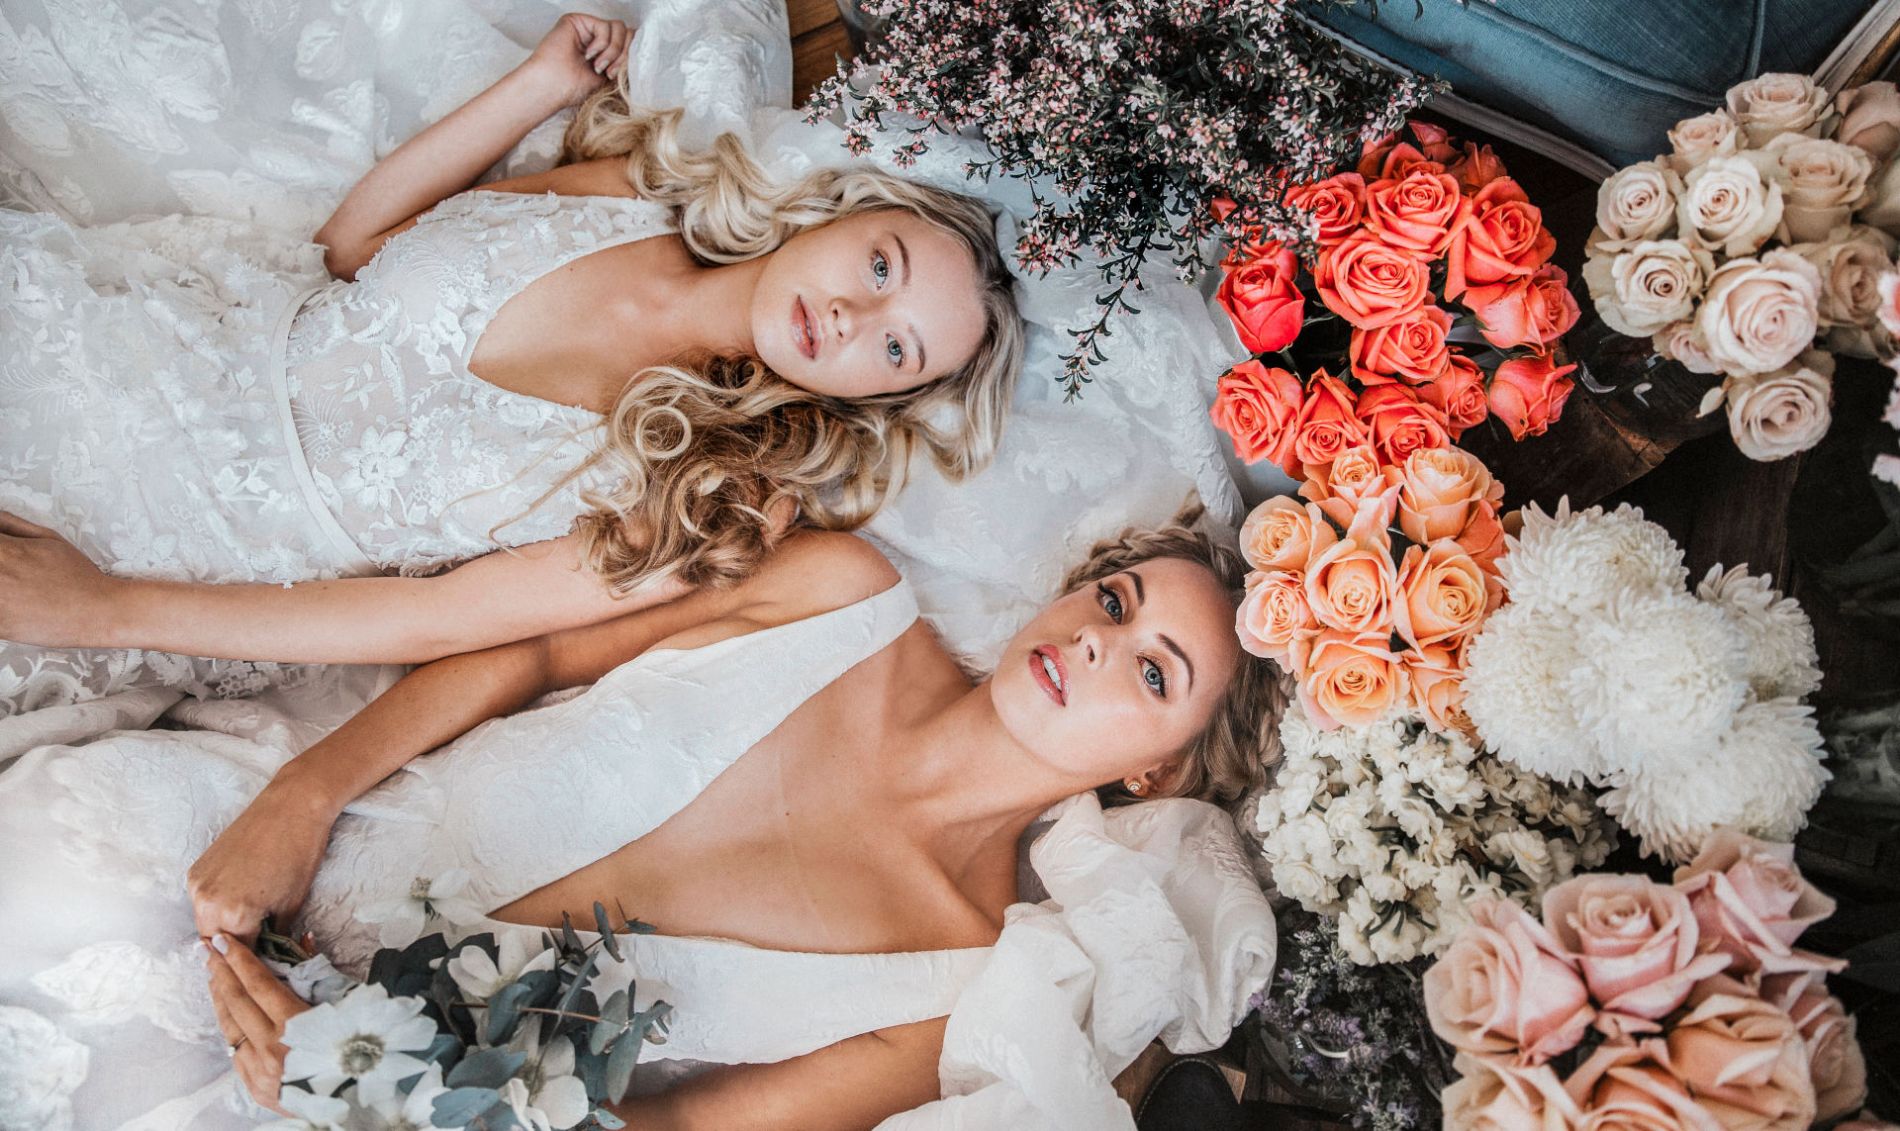 Brides lying amongst roses and flowers